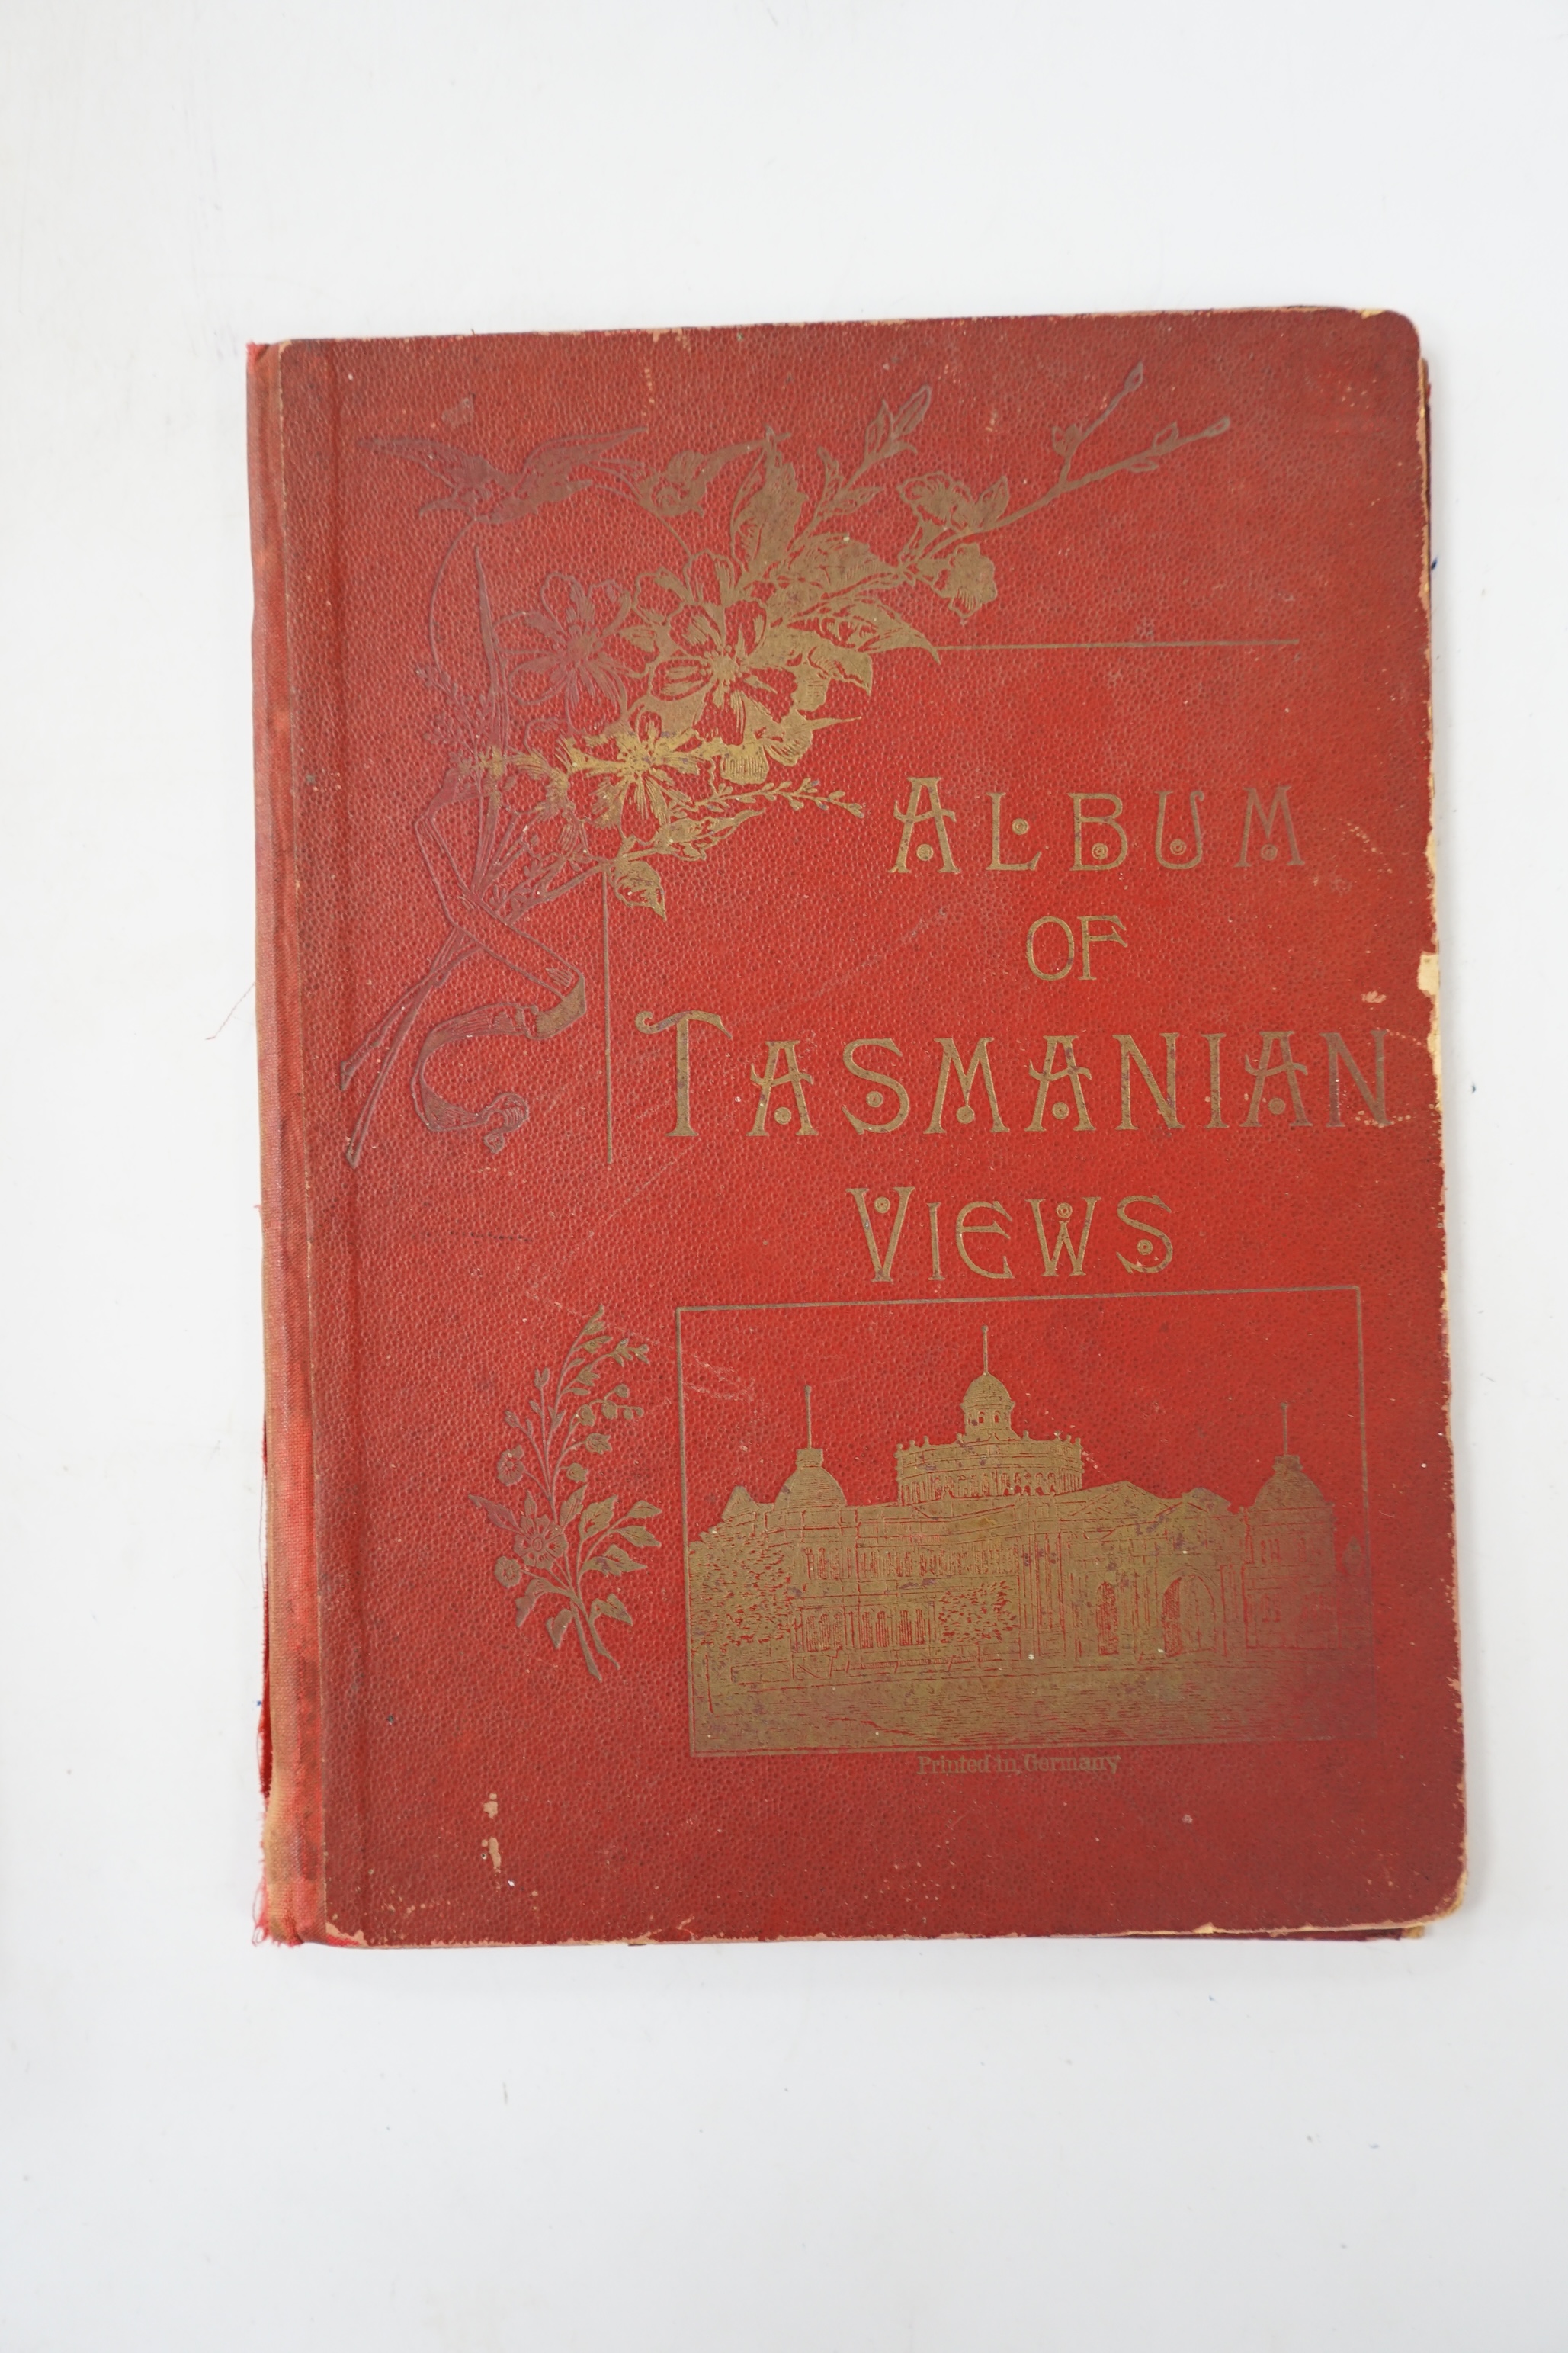 Martin, Robert Montgomery - The British Colonies, Australia. c.1855. original gilt red cloth. Album of Tasmanian Views. Hardback with gilt title to the front cover, no date but circa 1900. Published in Hobart by J Walch